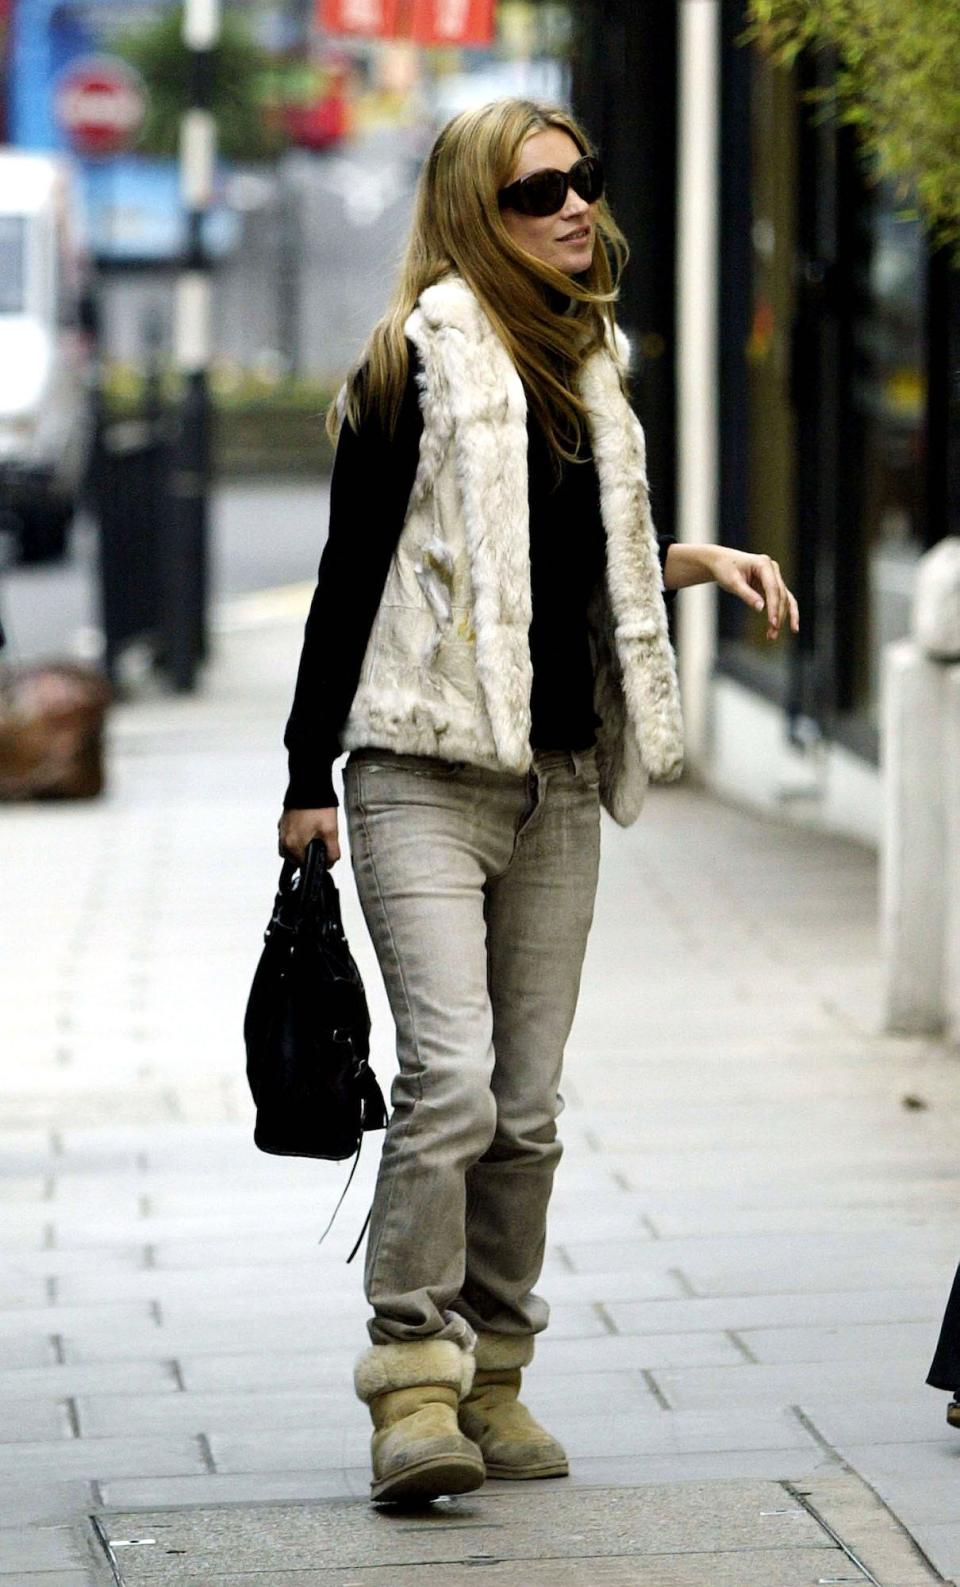 Kate Moss wears UGG shoes in London, England, on December 16, 2003.